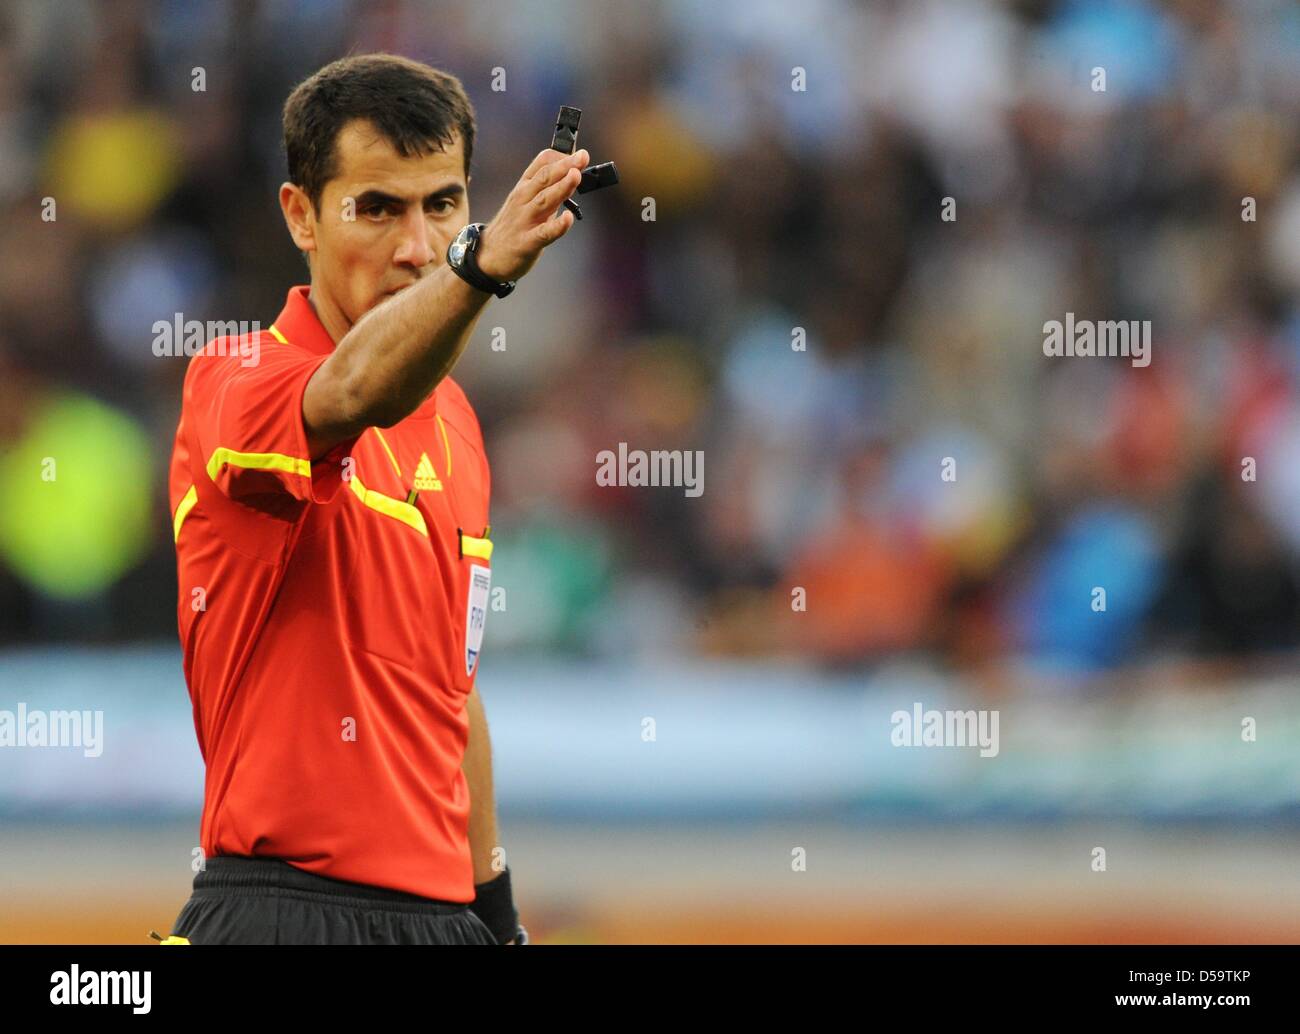 Usbek referee Ravshan Irmatov during the 2010 FIFA World Cup quarterfinal match between Argentina and Germany at the Green Point Stadium in Cape Town, South Africa 03 July 2010. Germany won 4-0. Photo: Marcus Brandt dpa - Please refer to http://dpaq.de/FIFA-WM2010-TC Stock Photo